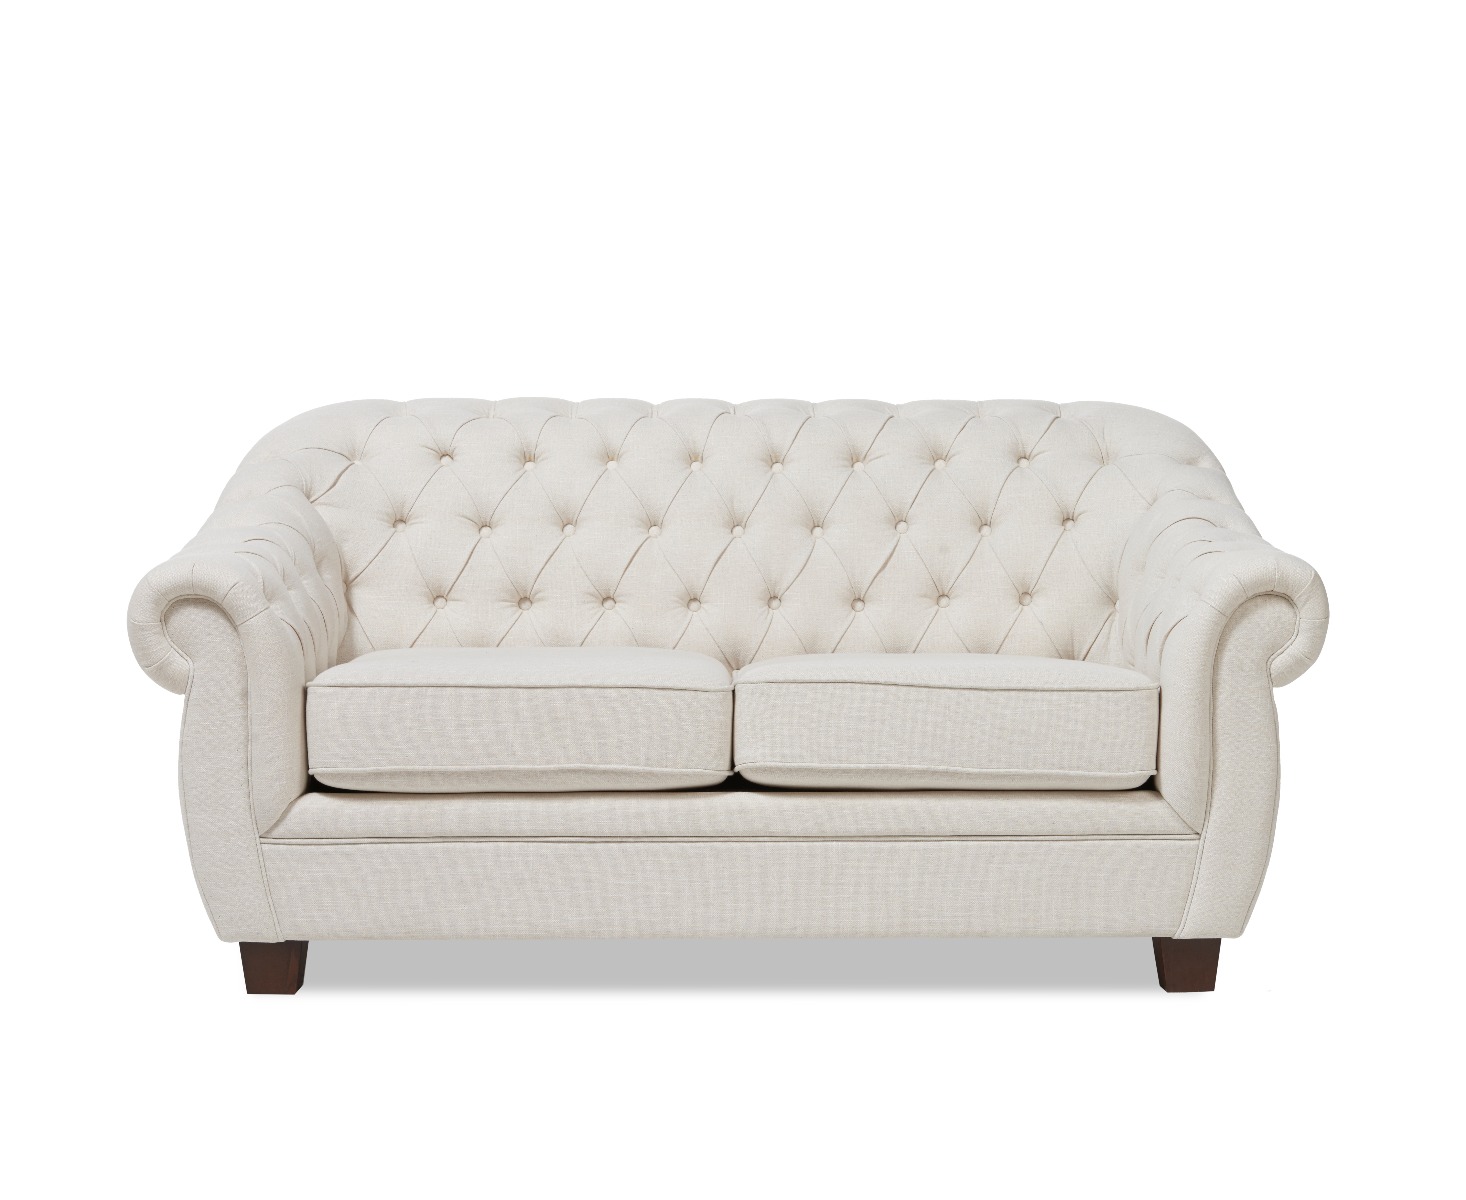 Photo 1 of Eva chesterfield ivory linen fabric two-seater sofa